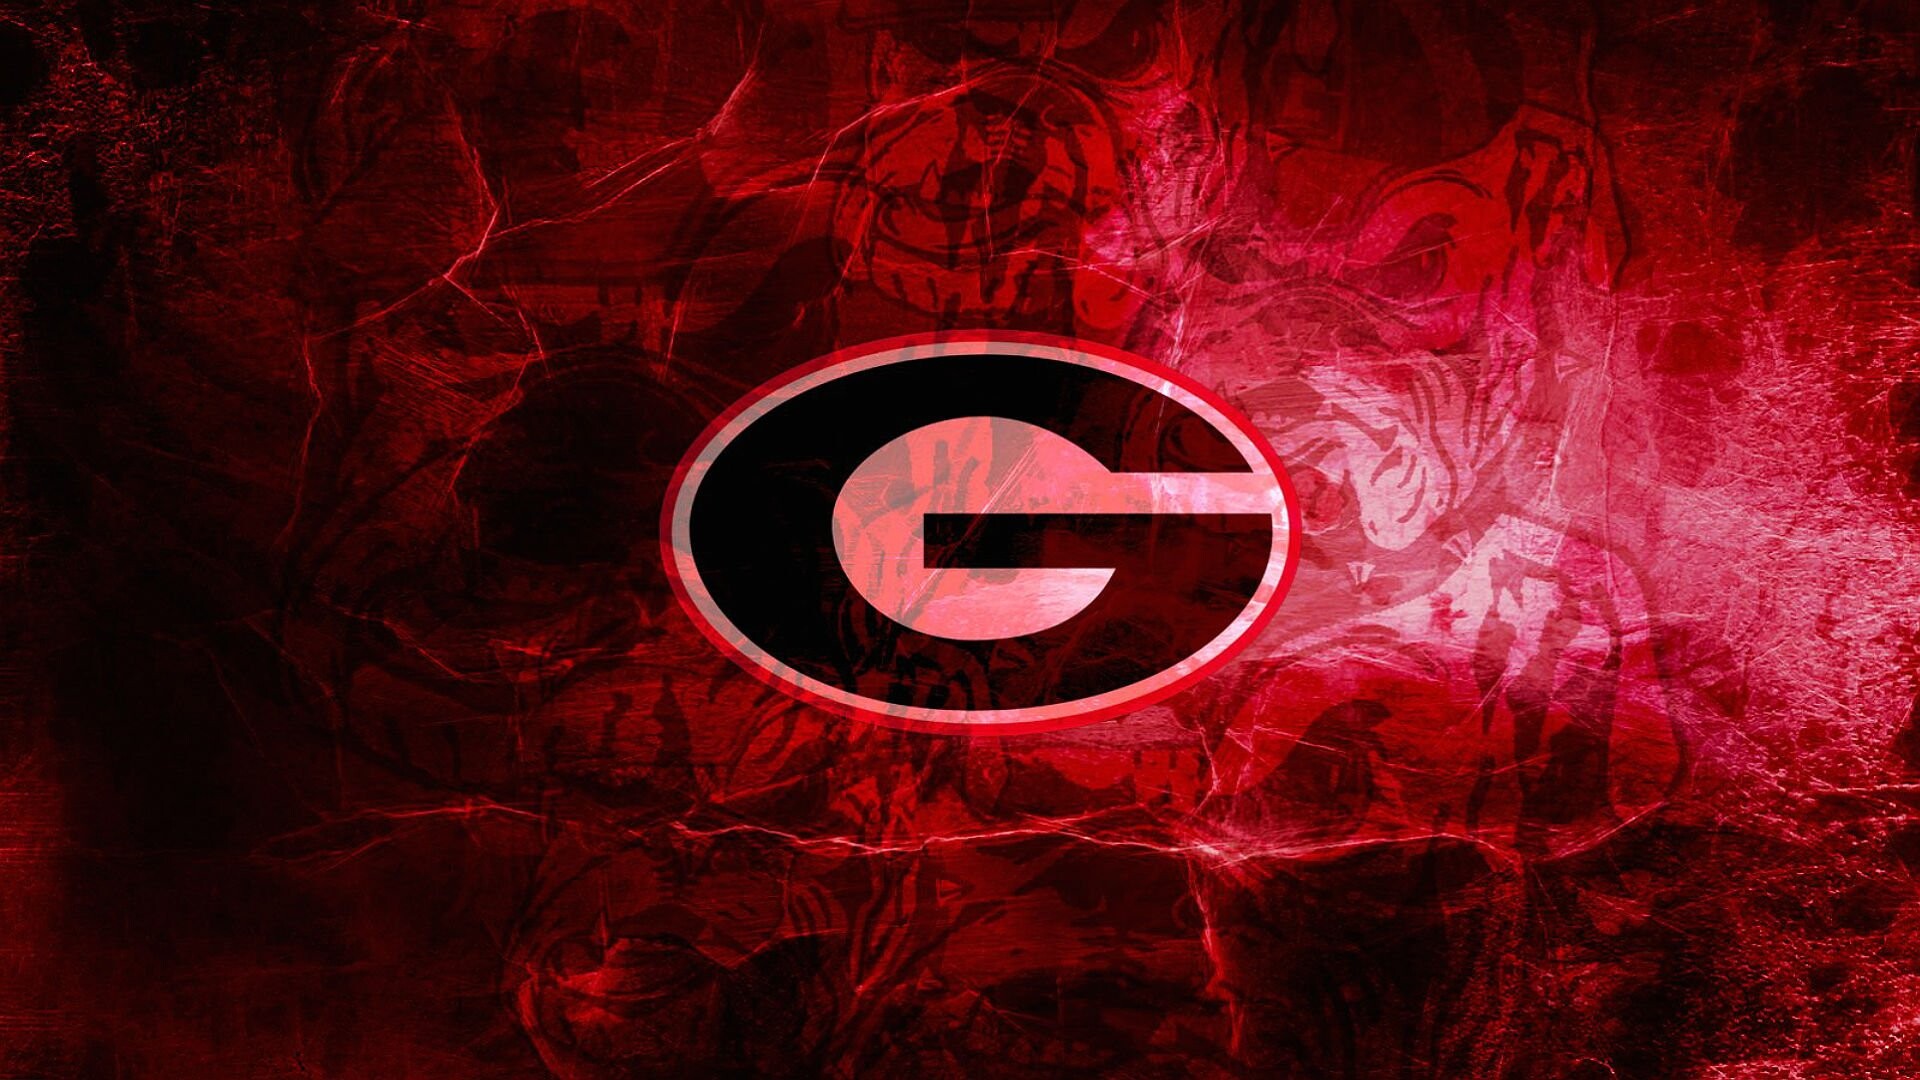 Georgia Bulldogs: College football, Red pattern, The team that have appeared in 59 bowl games, UGA. 1920x1080 Full HD Background.